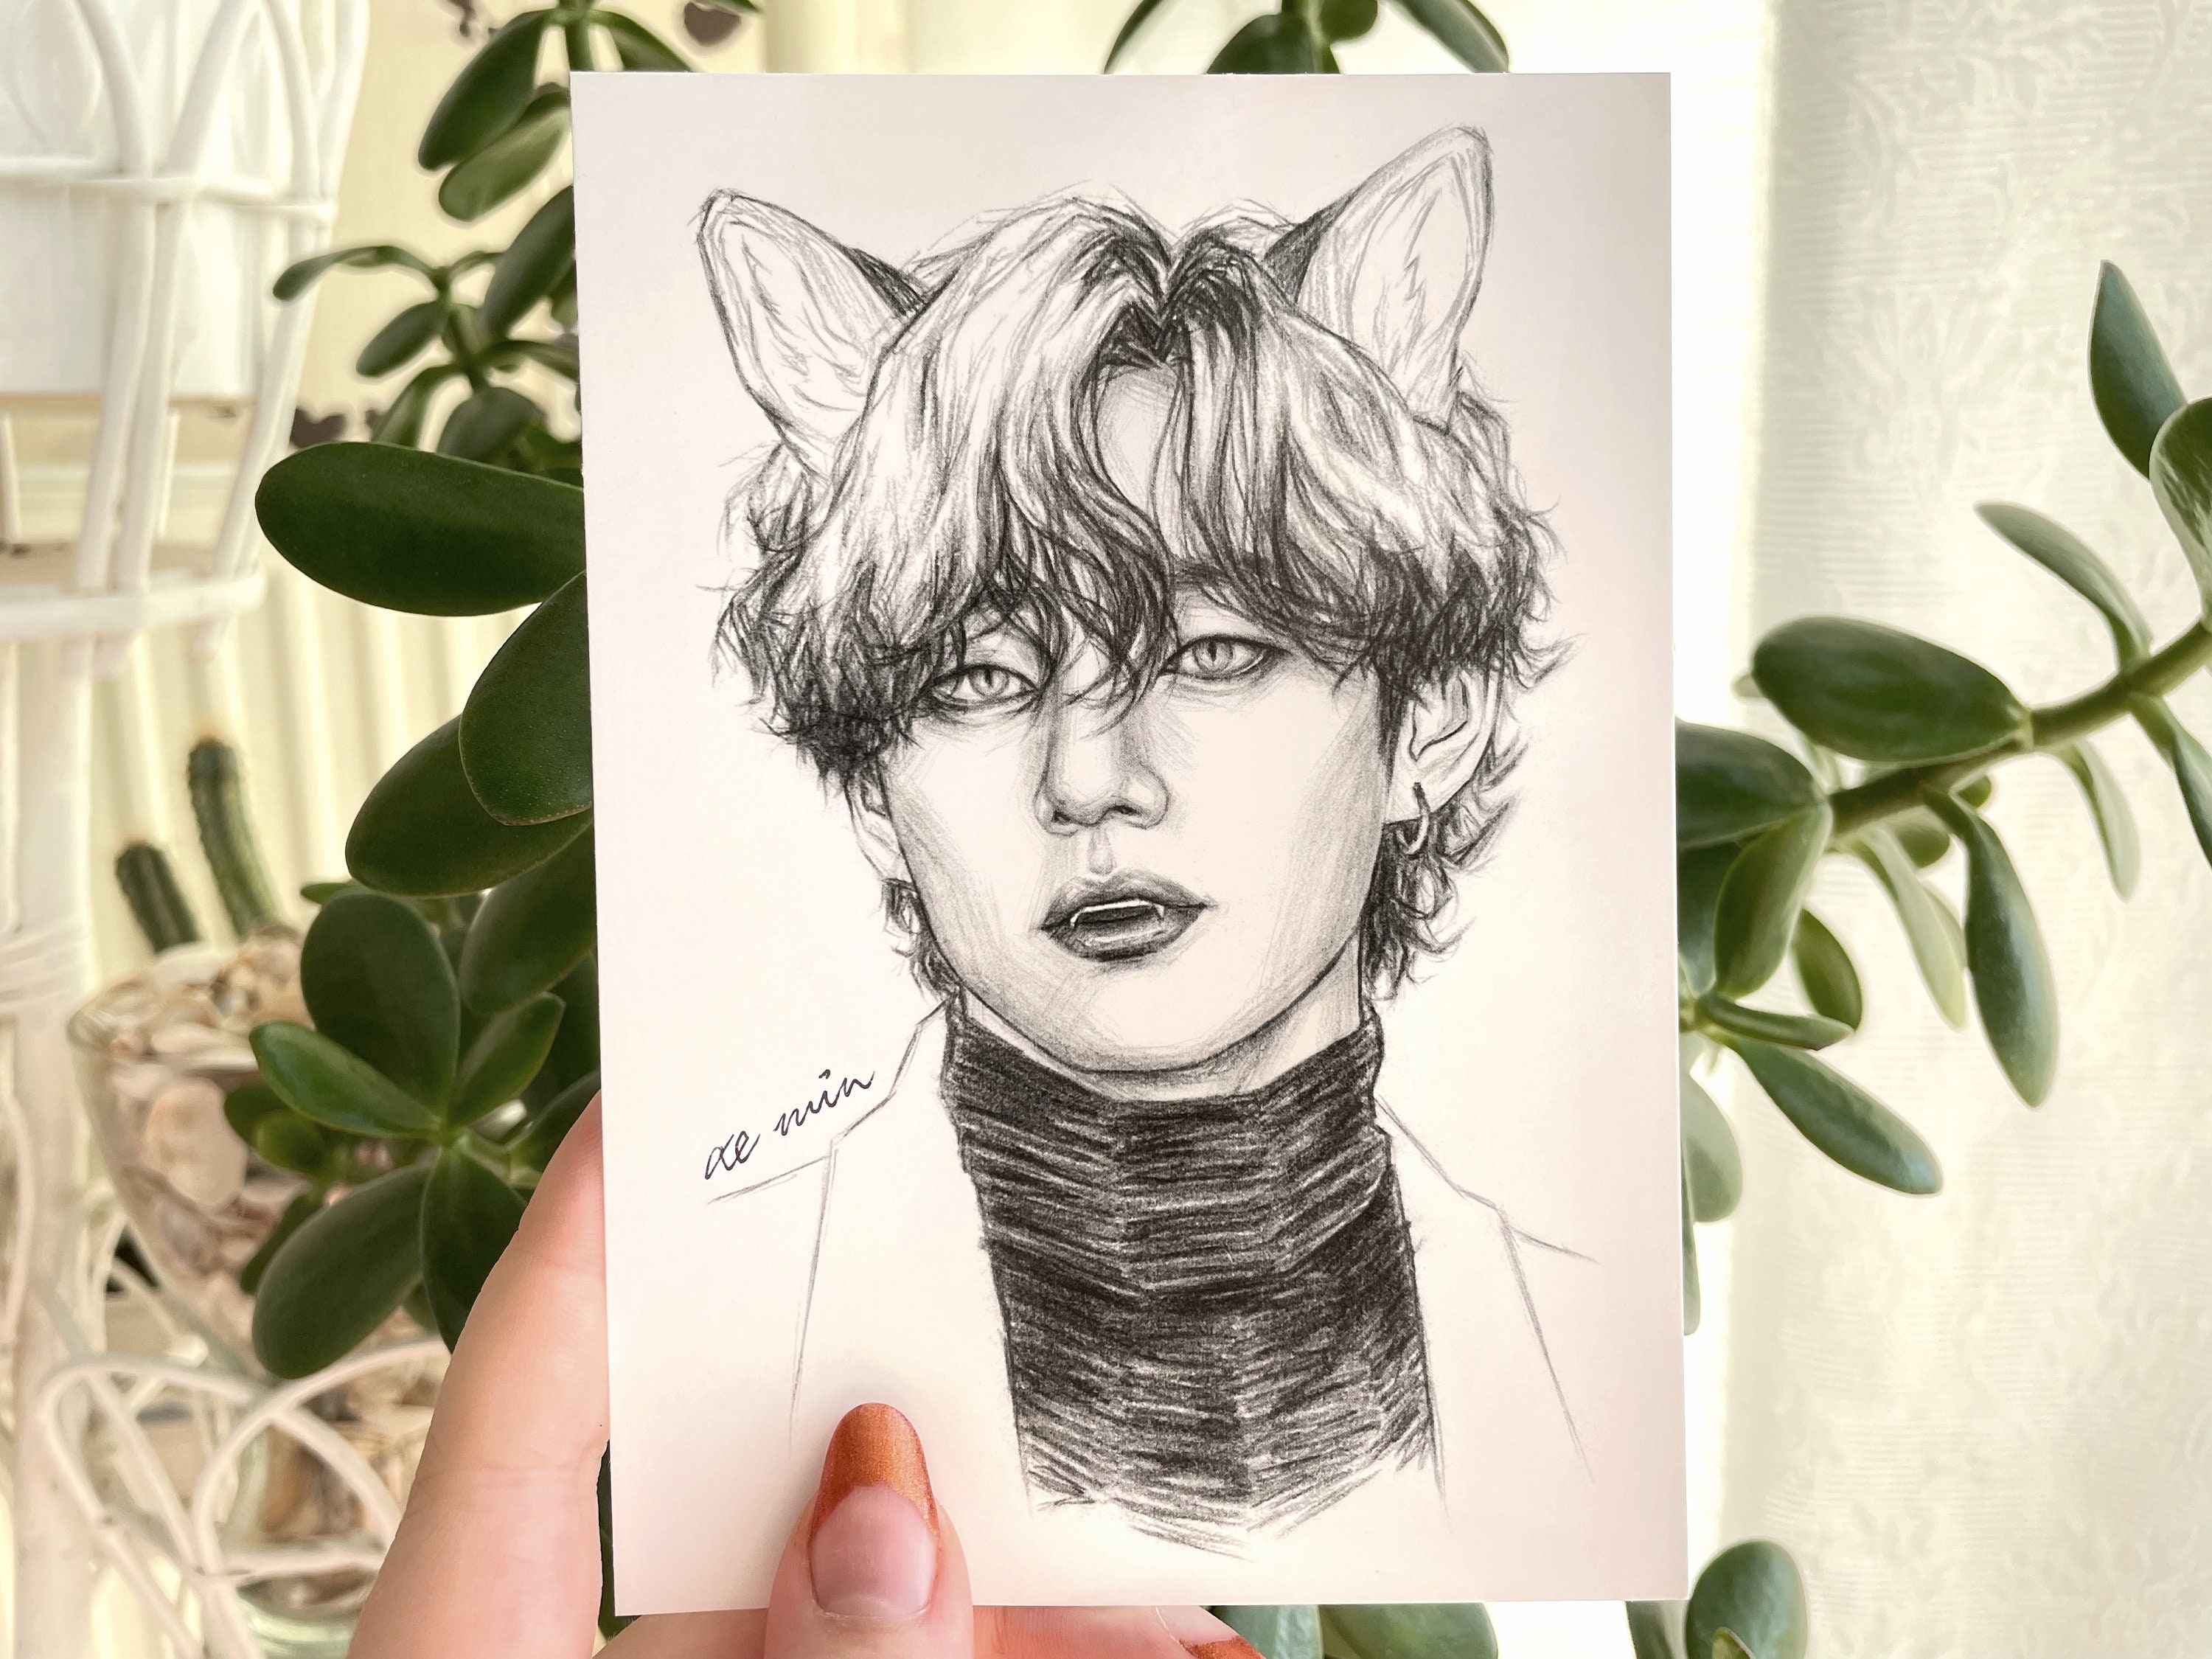 Kim Taehyung V Bts V Taehyung Bts Army Idol Kpop Music Matte Finish Poster  Paper Print - Animation & Cartoons posters in India - Buy art, film,  design, movie, music, nature and